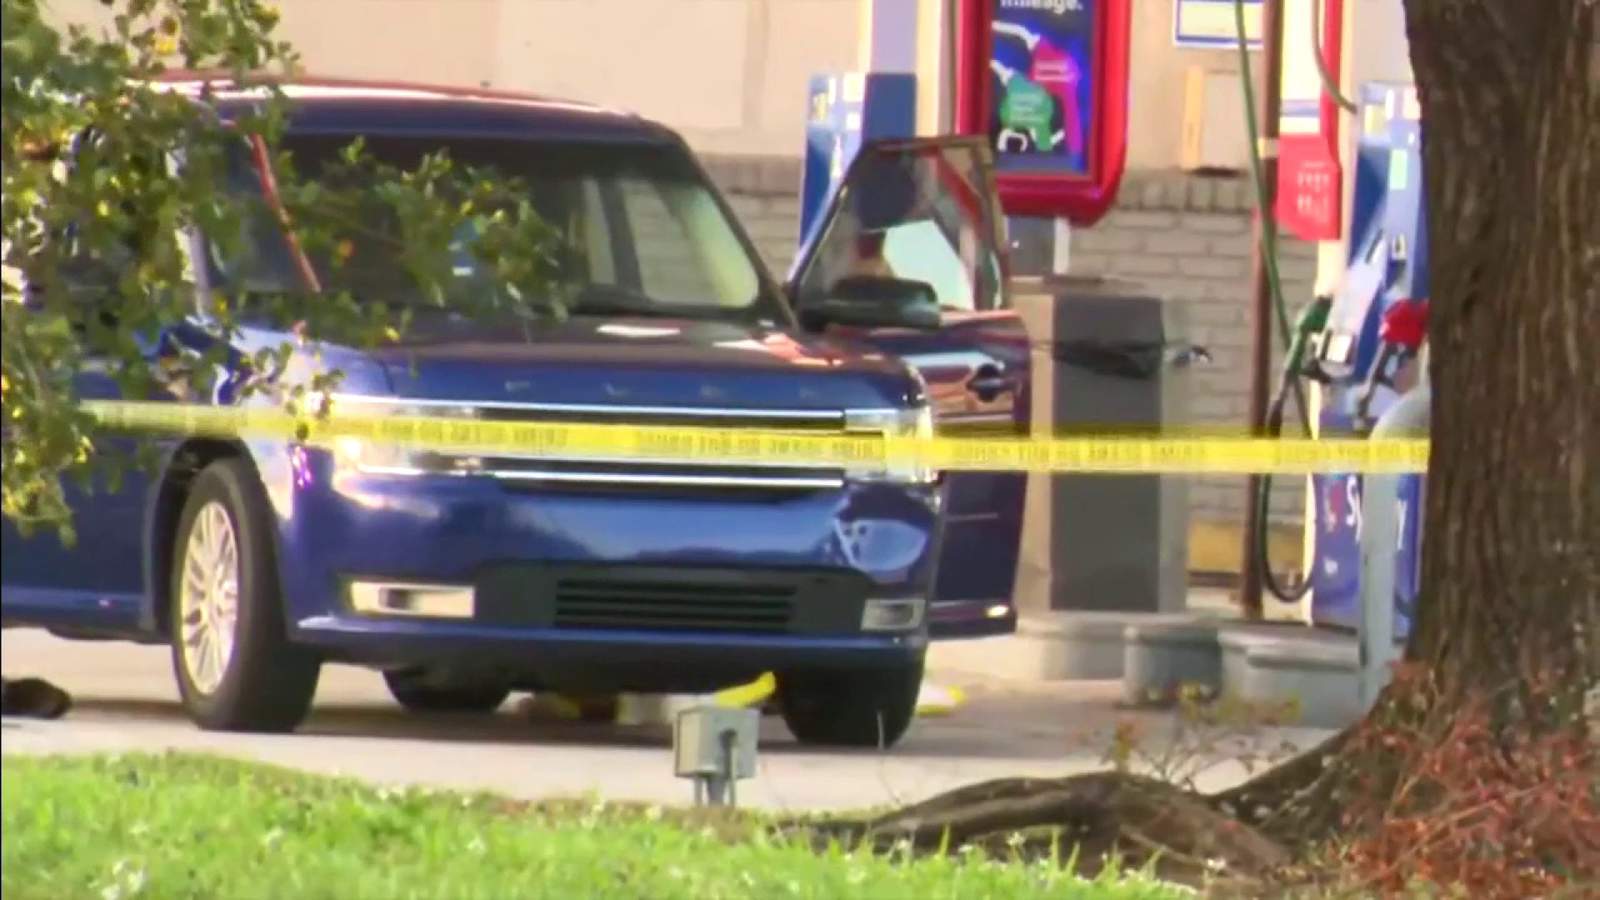 BSO: Car with 3 shooting victims ends up at Pompano Beach gas station, 1 person dead